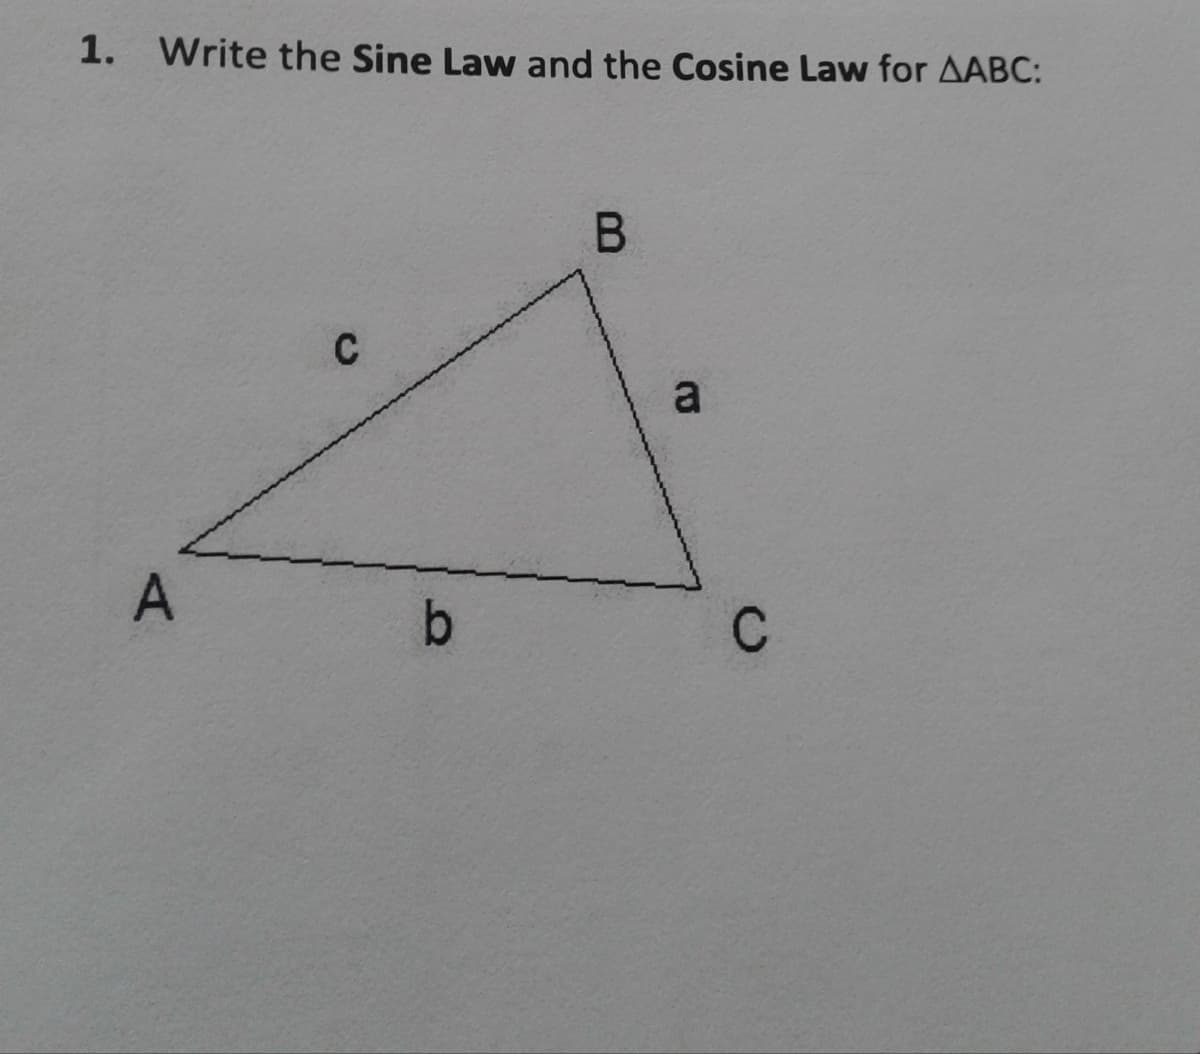 1. Write the Sine Law and the Cosine Law for AABC:
C
a
A
b.
C
